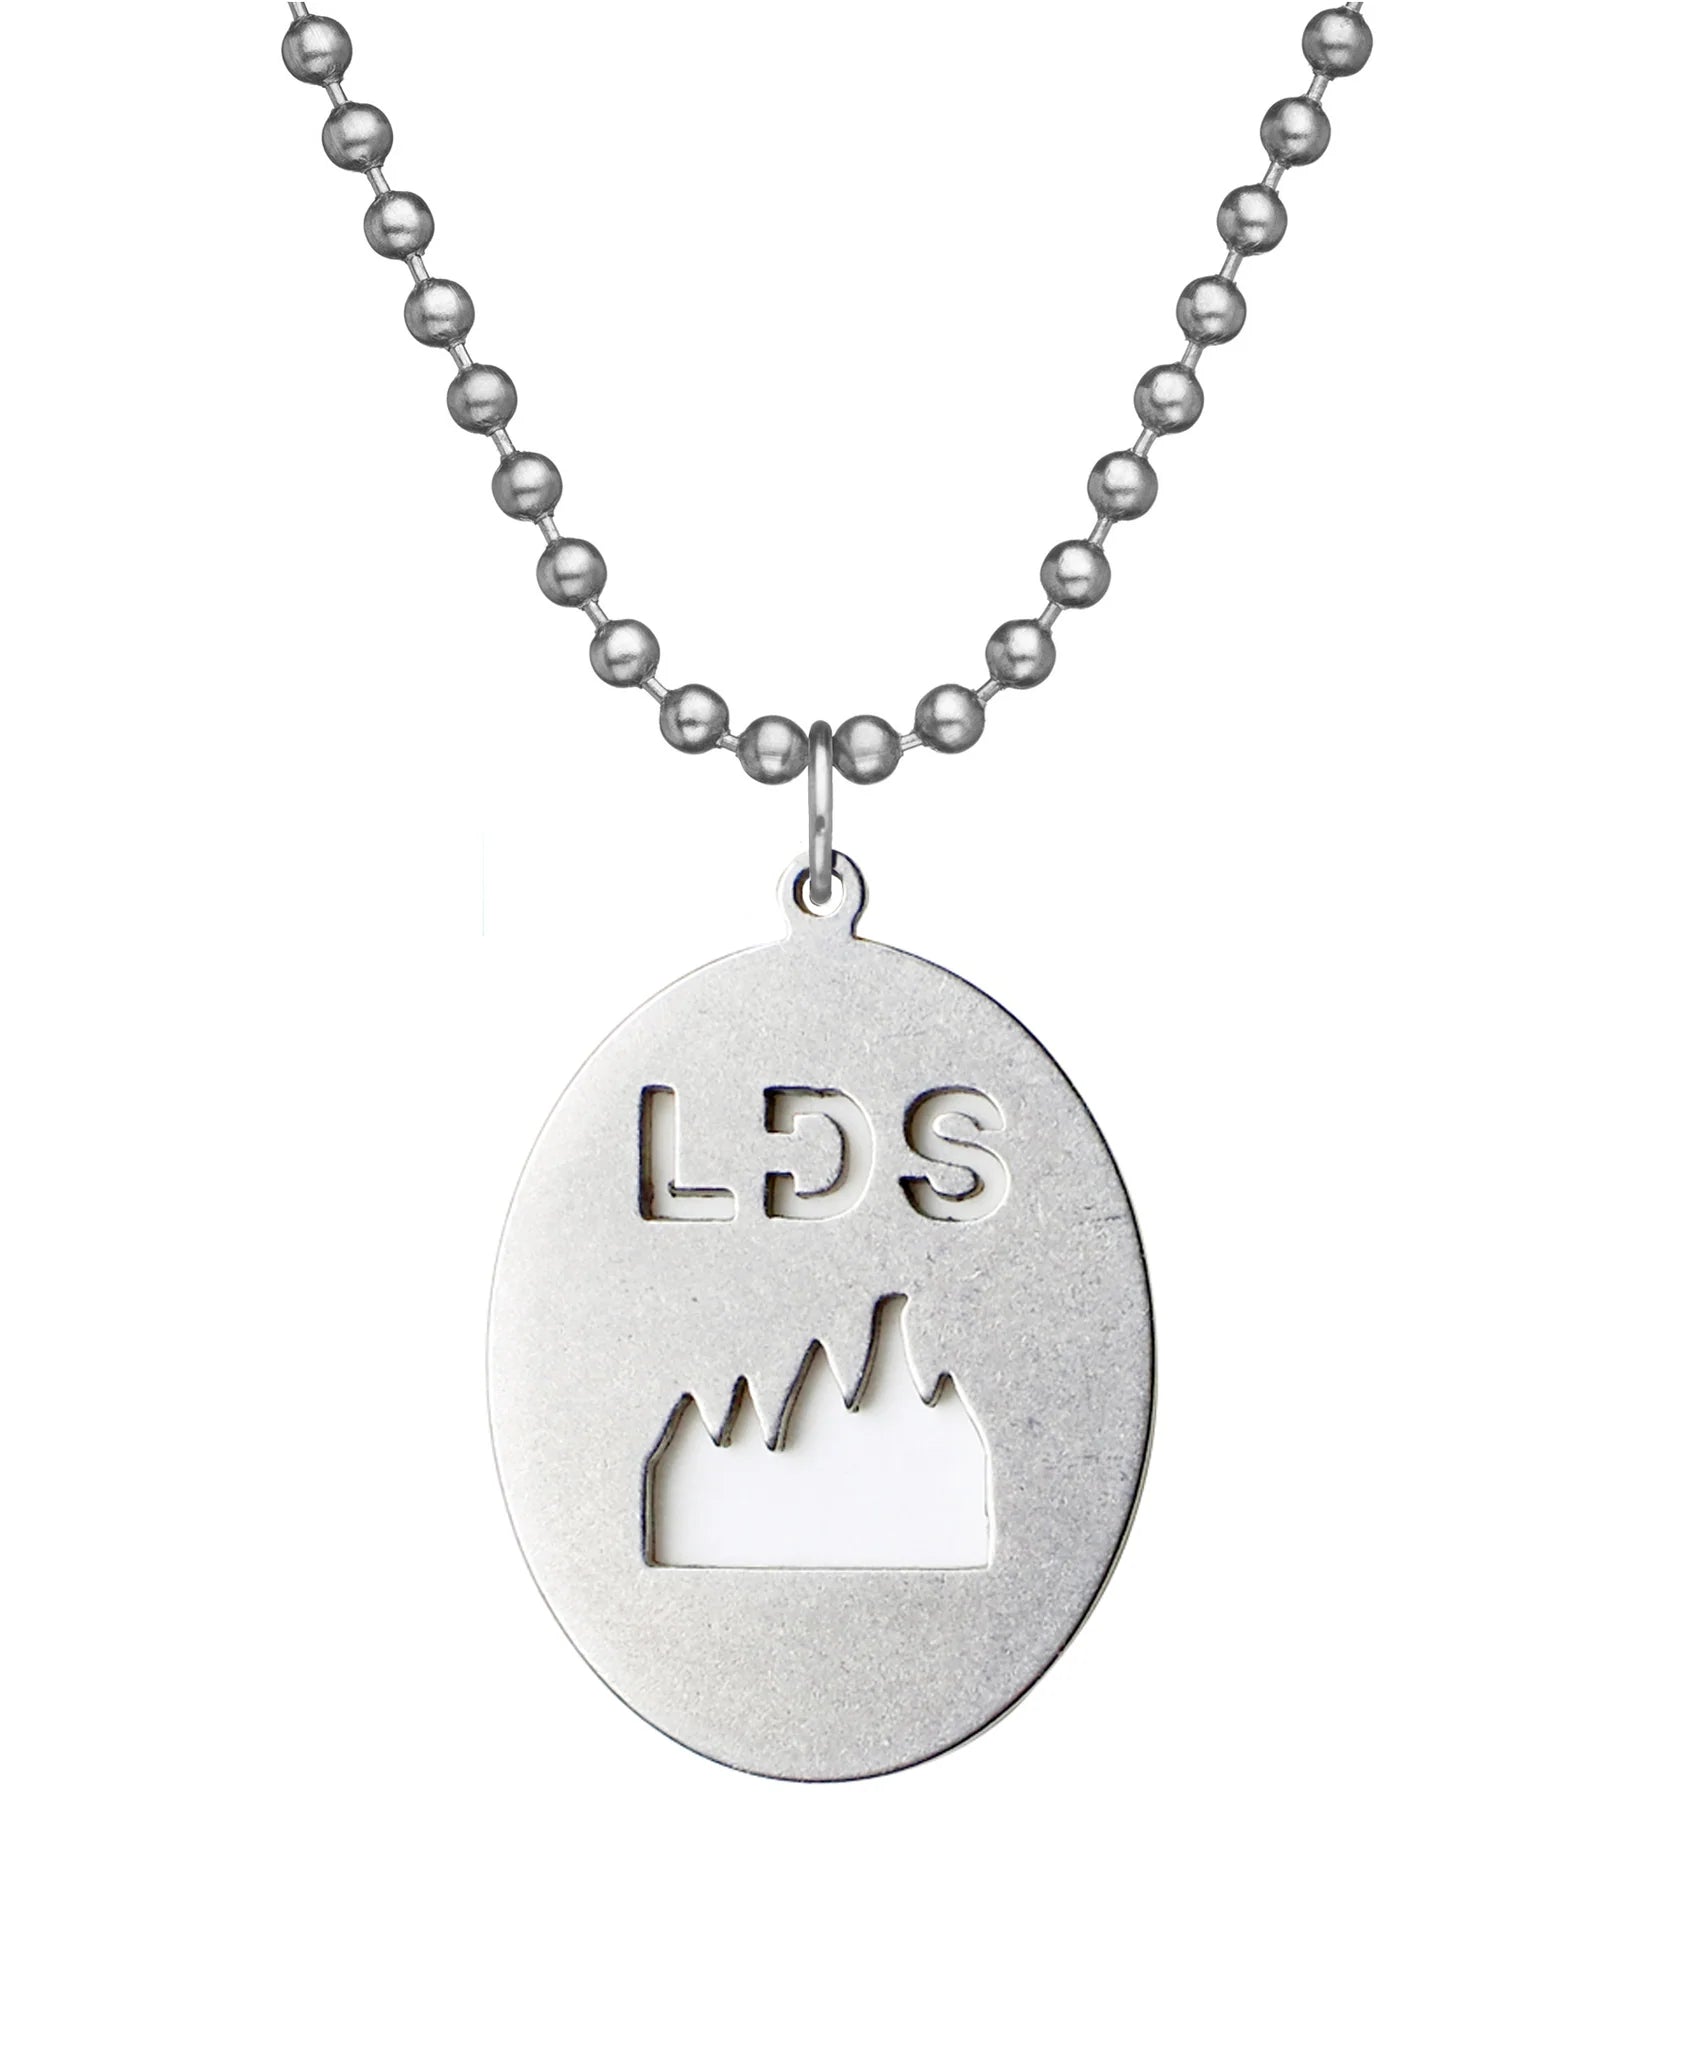 Latter Day Saints LDS Necklace with Dog Tag Chain - Military Issue